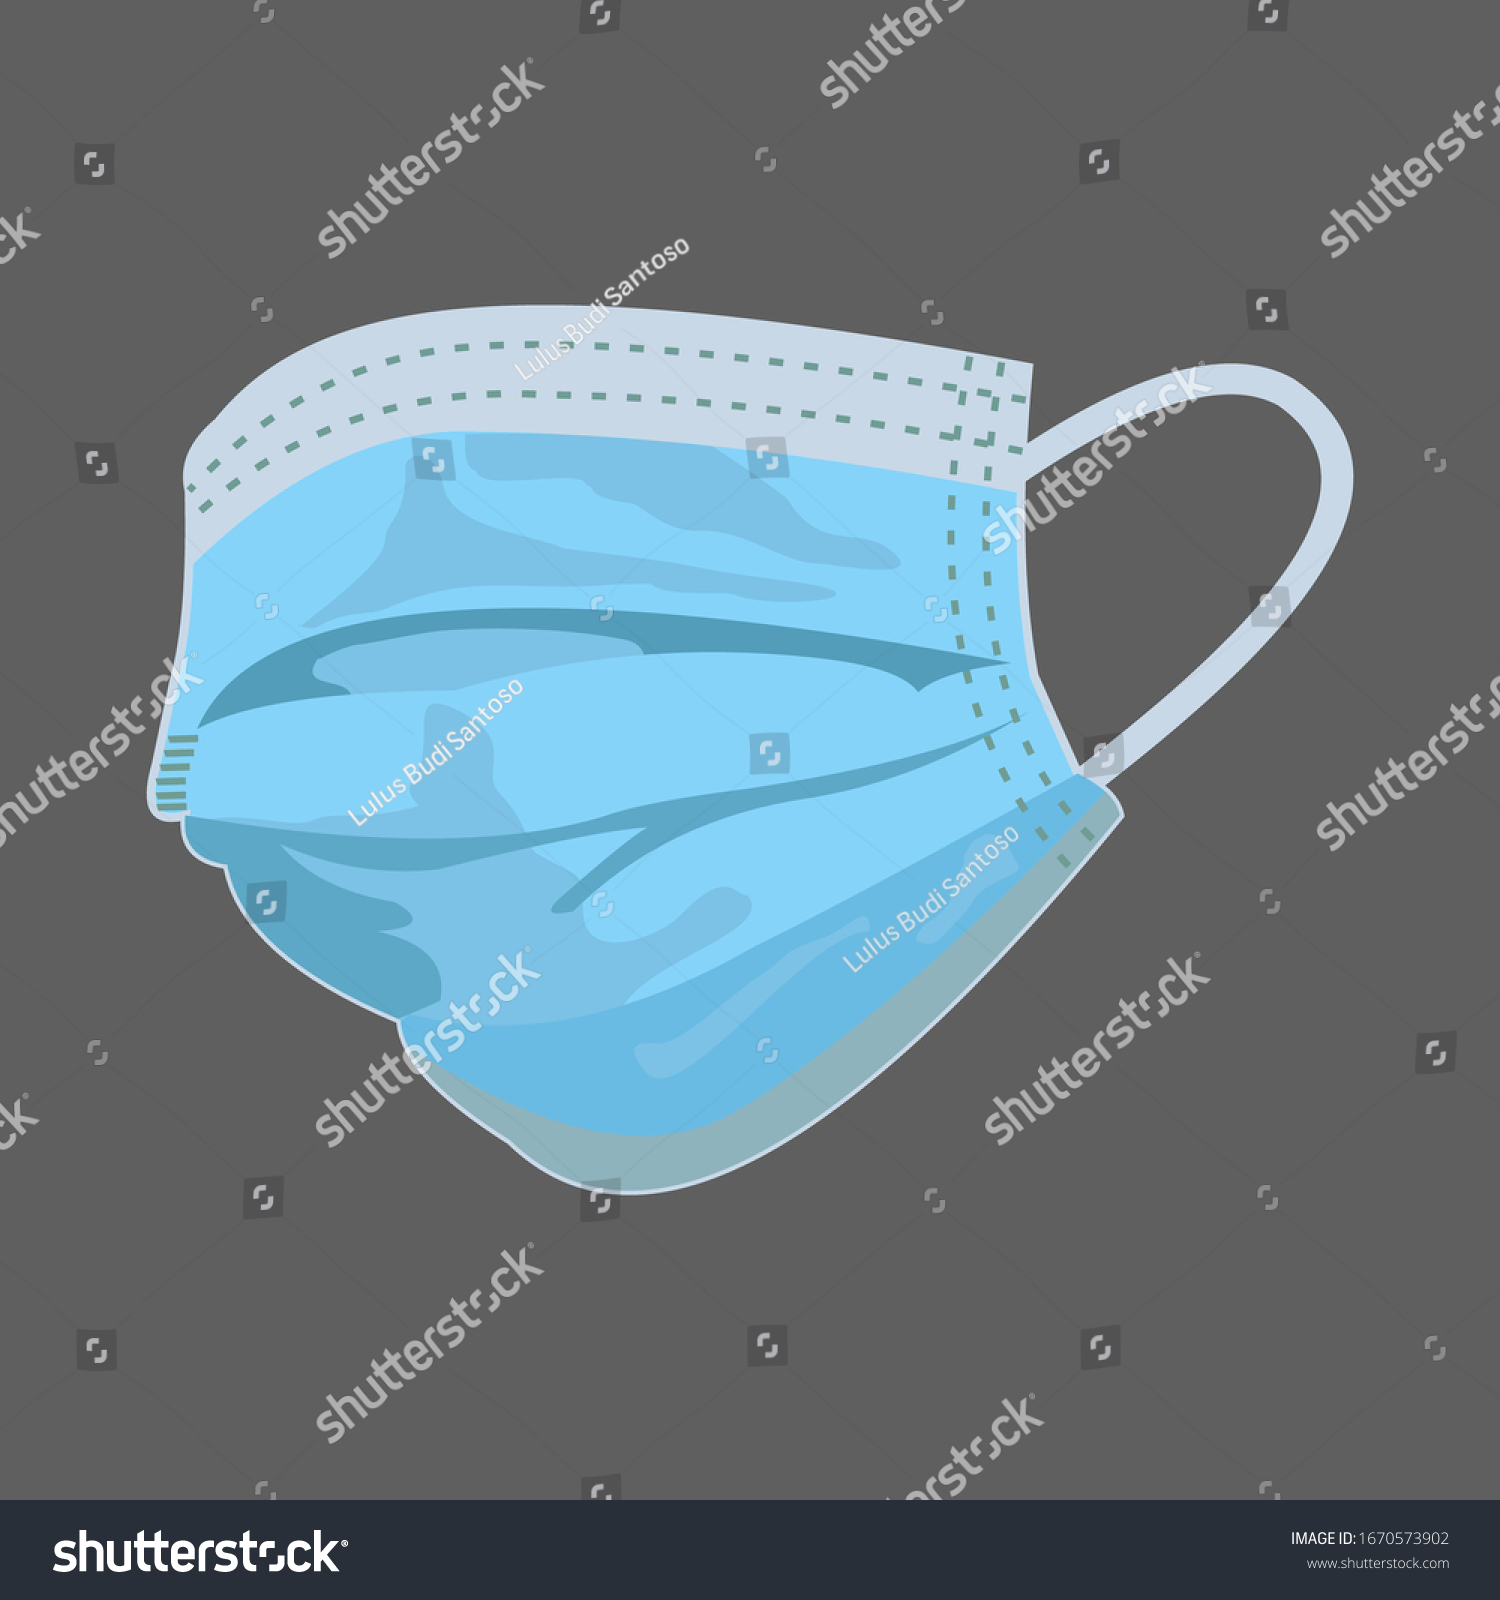 Respiratory mask for medical. Hospital or protect pollution with face masks. Vector illustration #1670573902